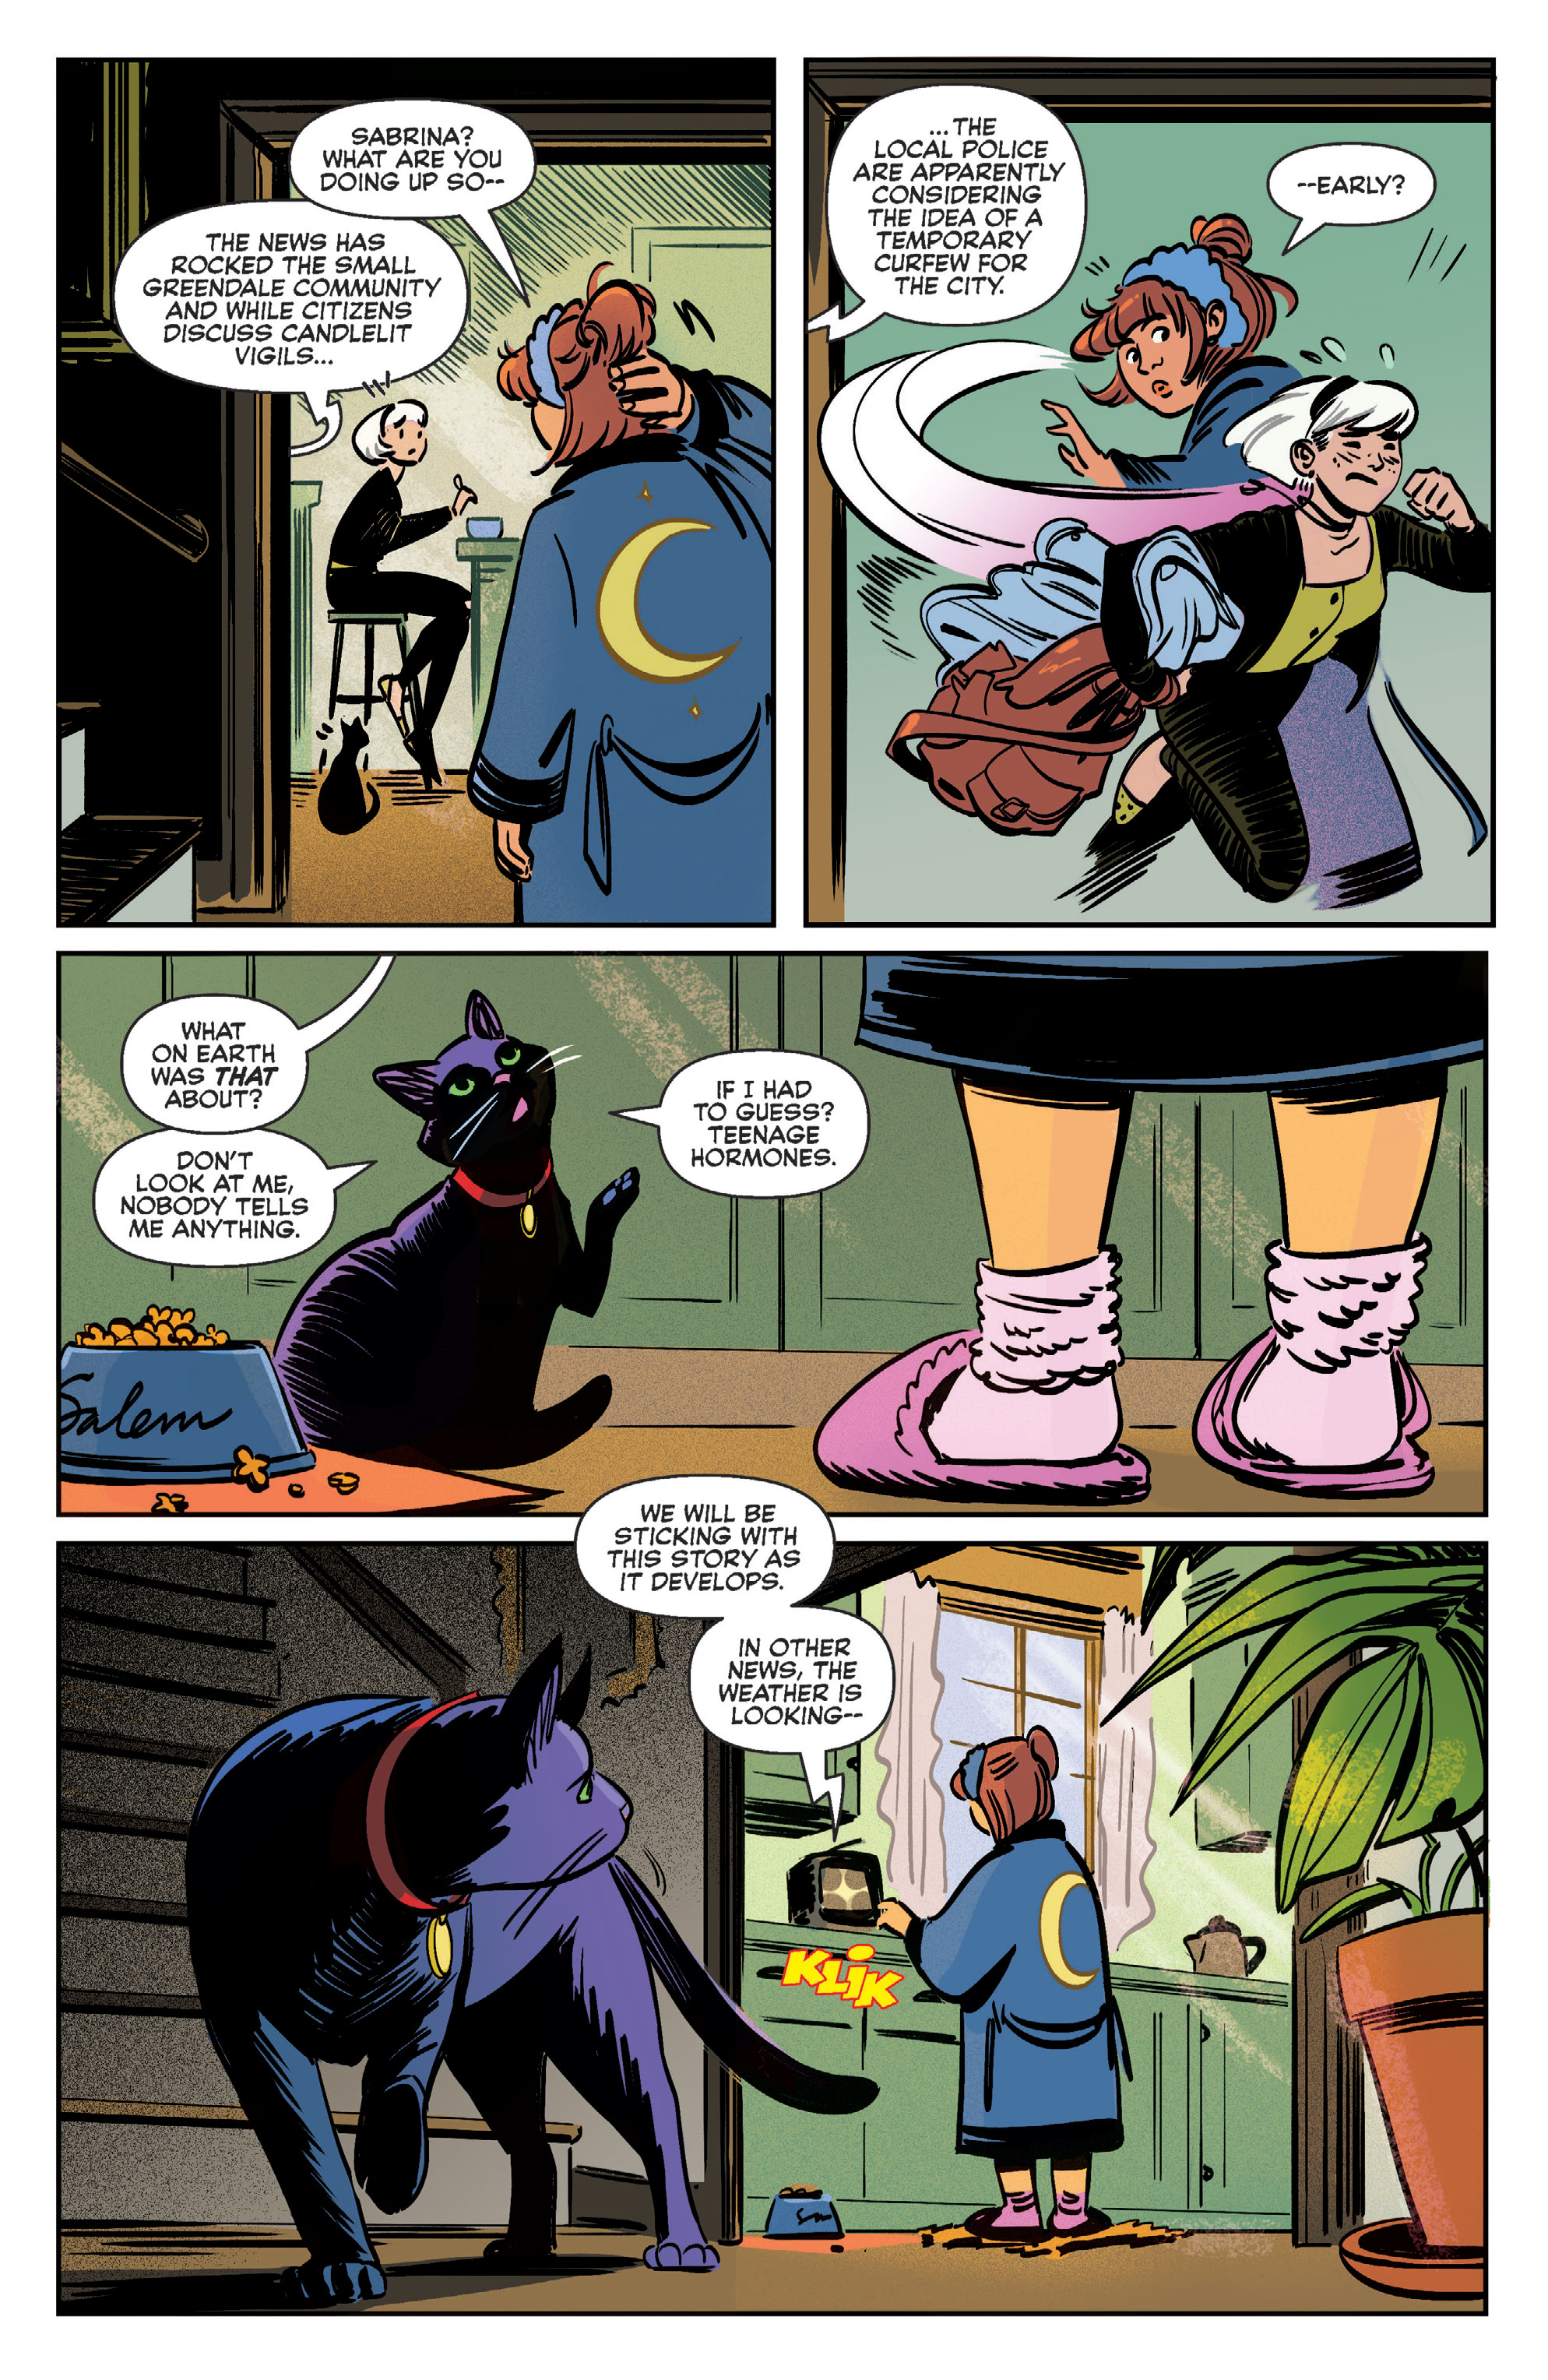 Sabrina: Something Wicked (2020-): Chapter 2 - Page 4